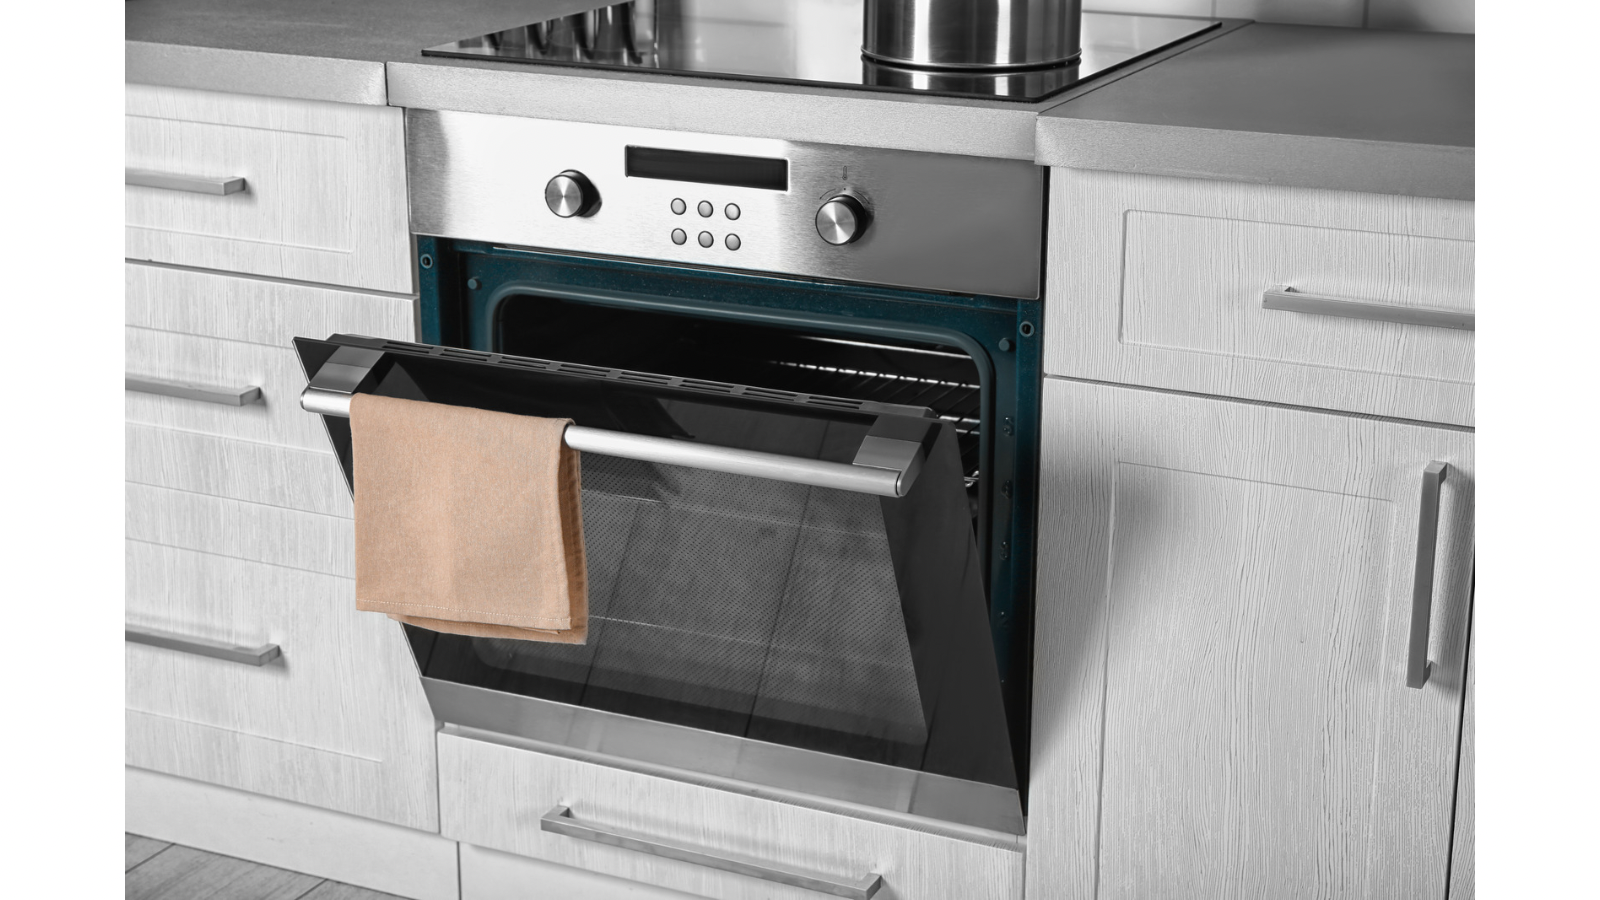 Convection Oven: The Appliance That Helps You Cook Faster